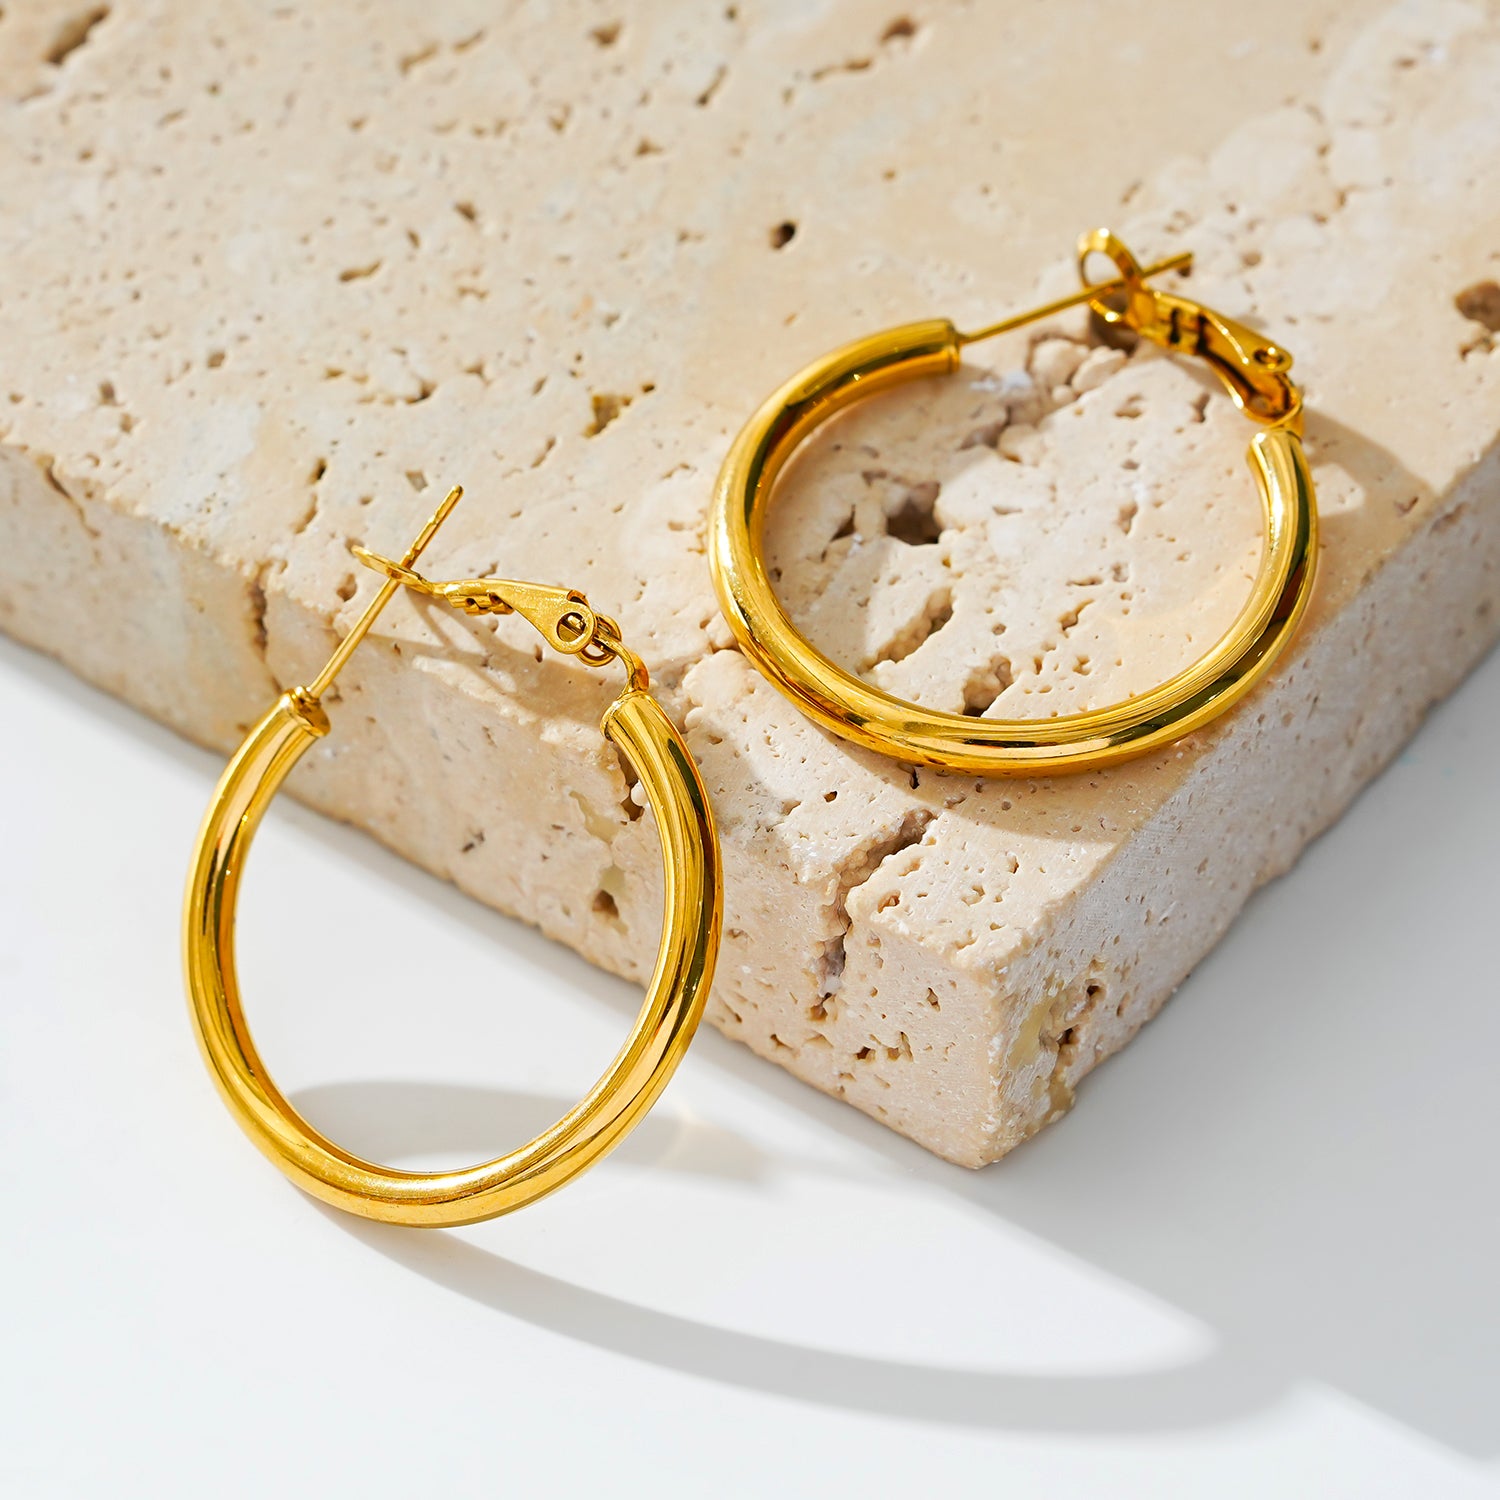 Style MICHI 1153: Mid-Width Essential Hoop Earrings Gold Size A